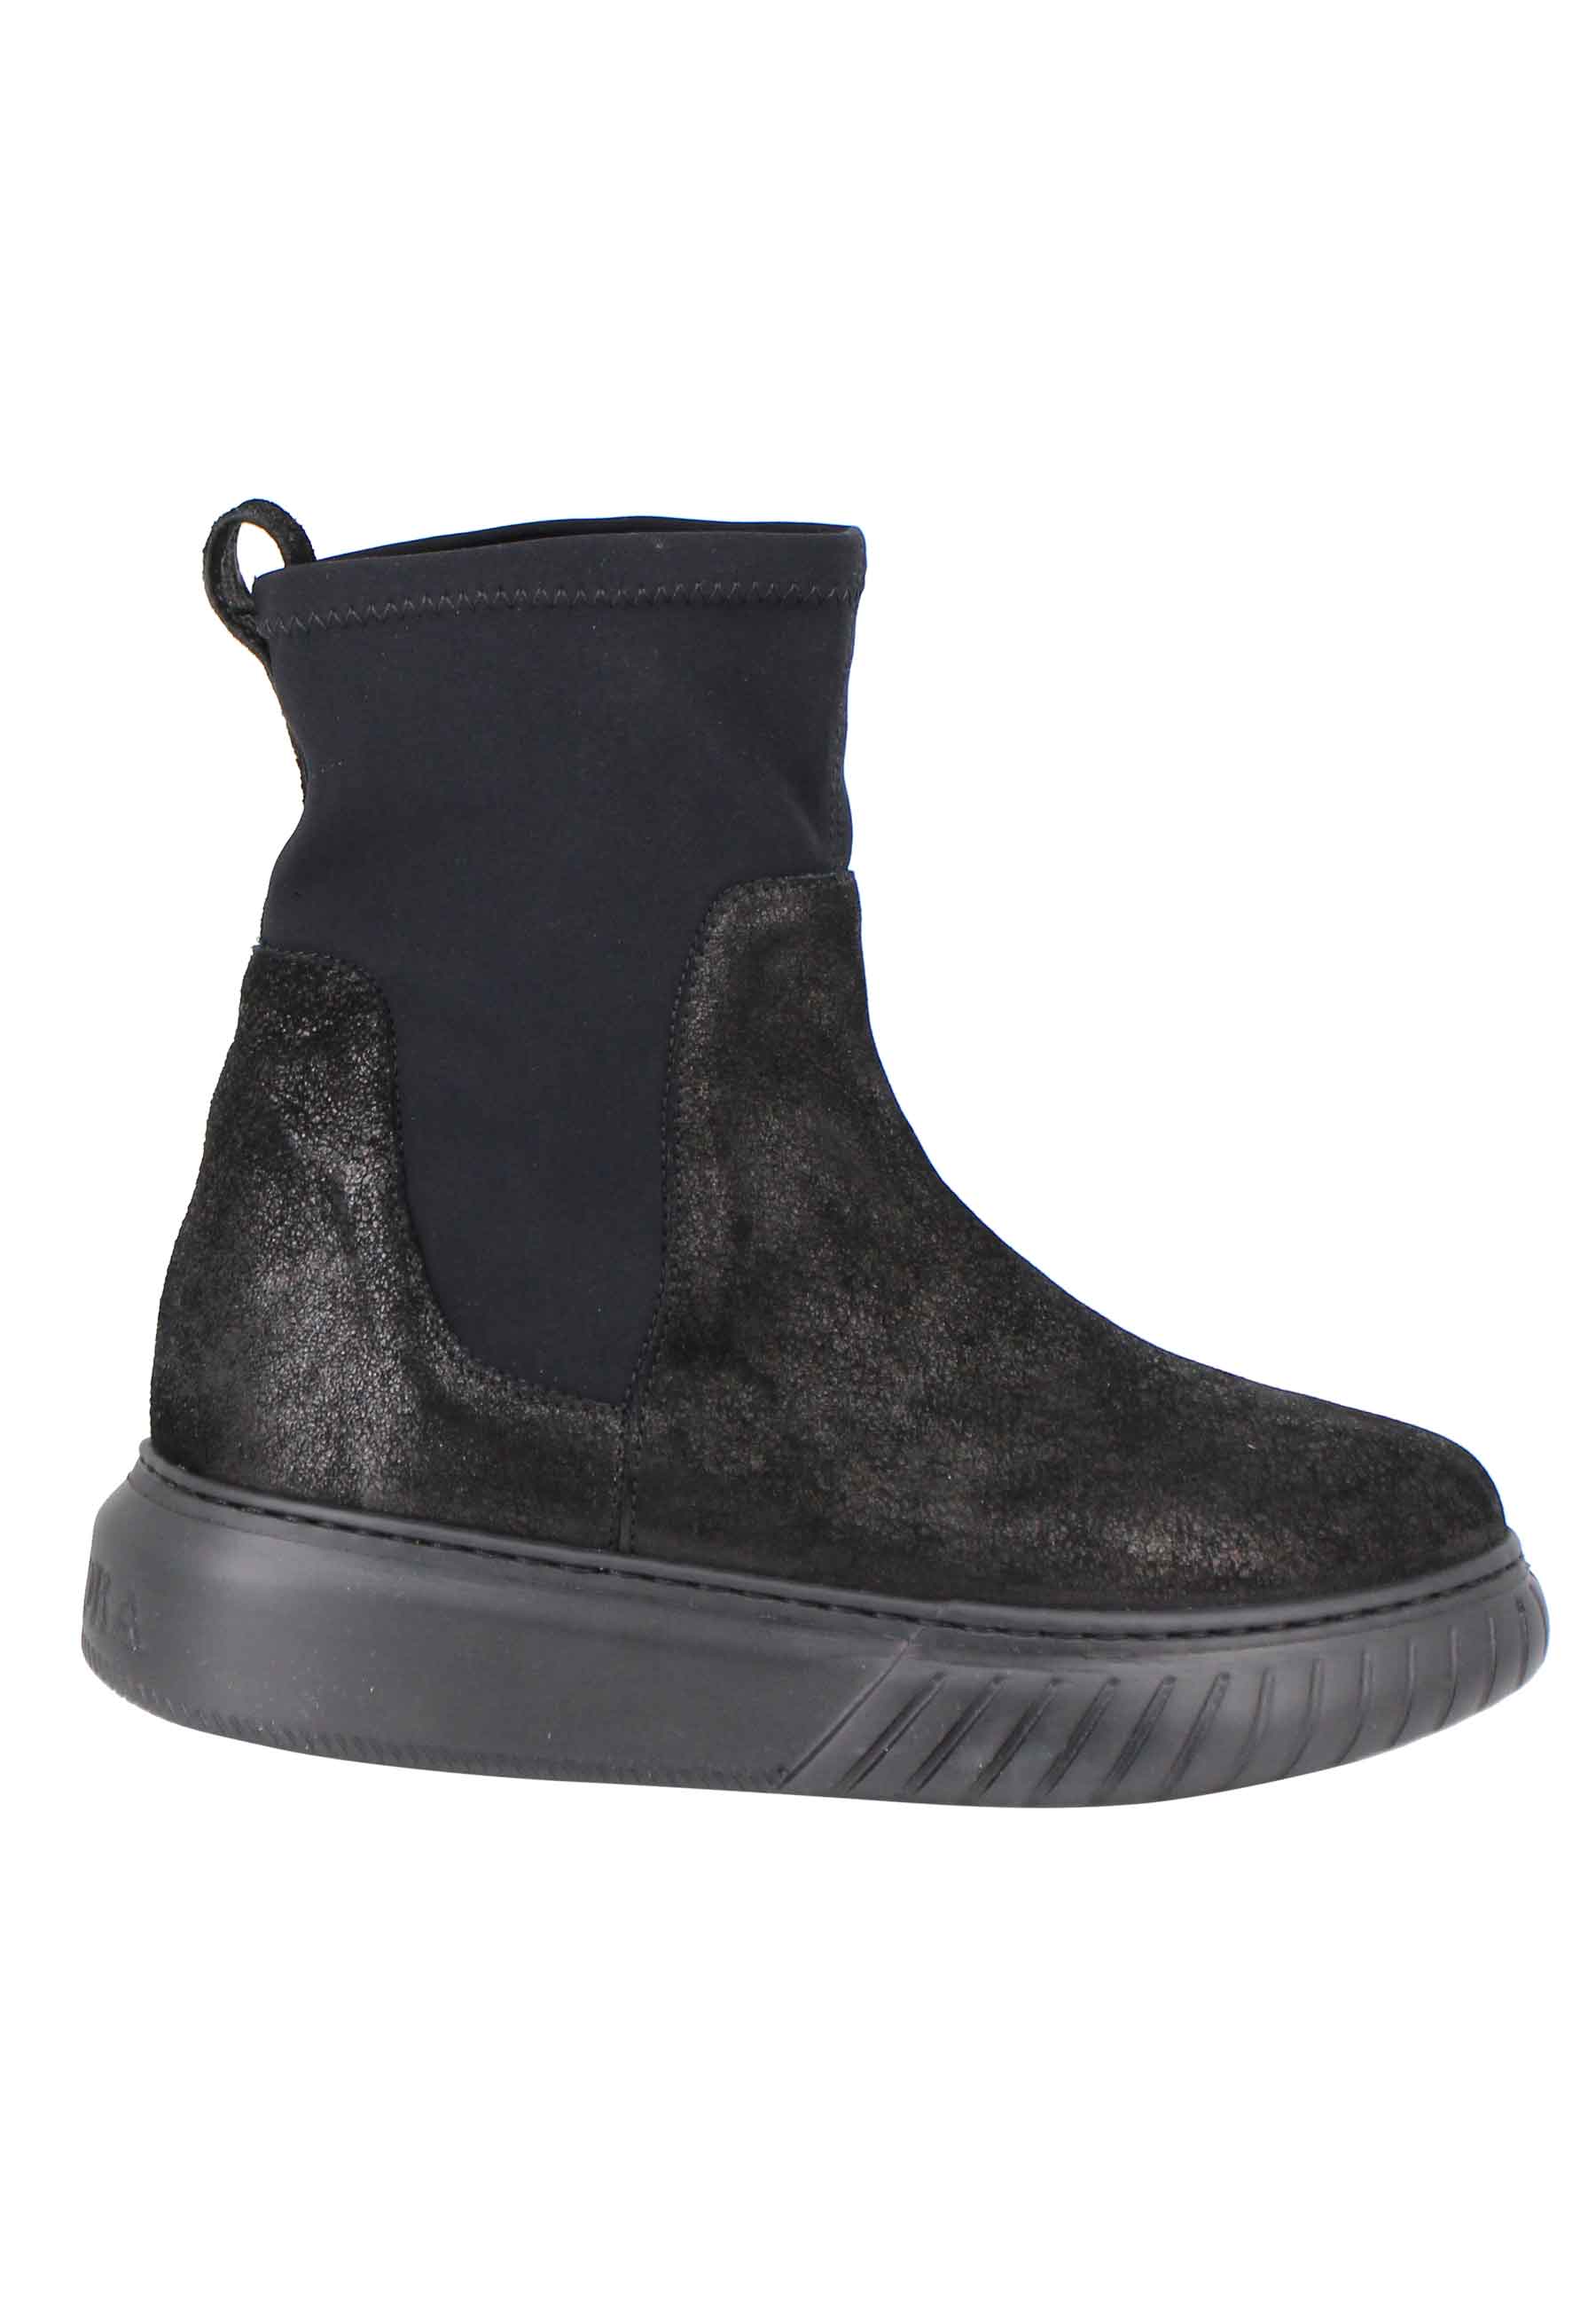 Women's ankle-boot sneakers in black leather and matching stretch fabric with high rubber sole